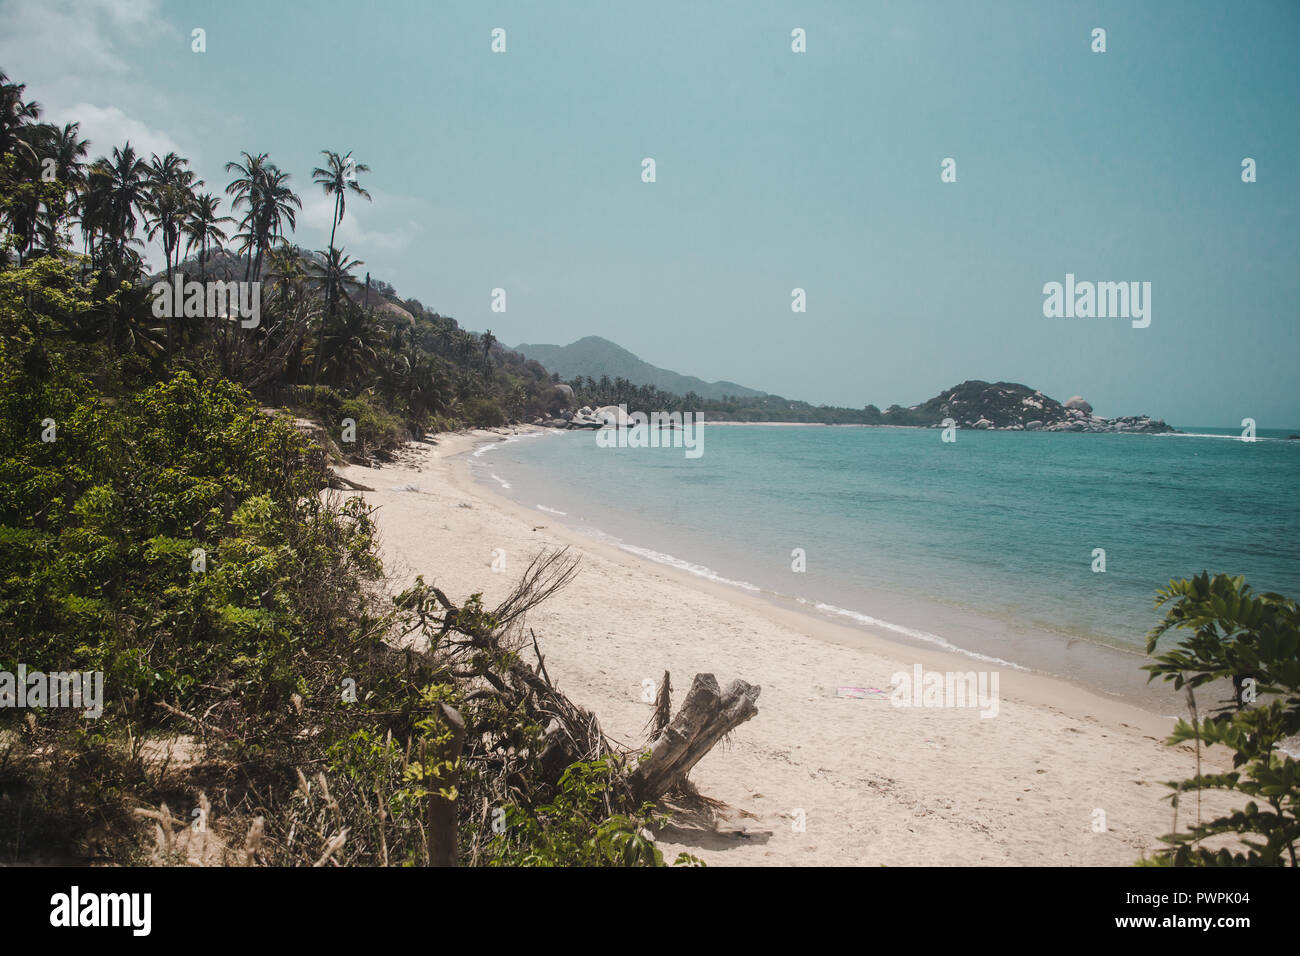 Pristine white sand beach of Tayrona National Park surrounded by jungle on the Caribbean coast of Colombia Stock Photo